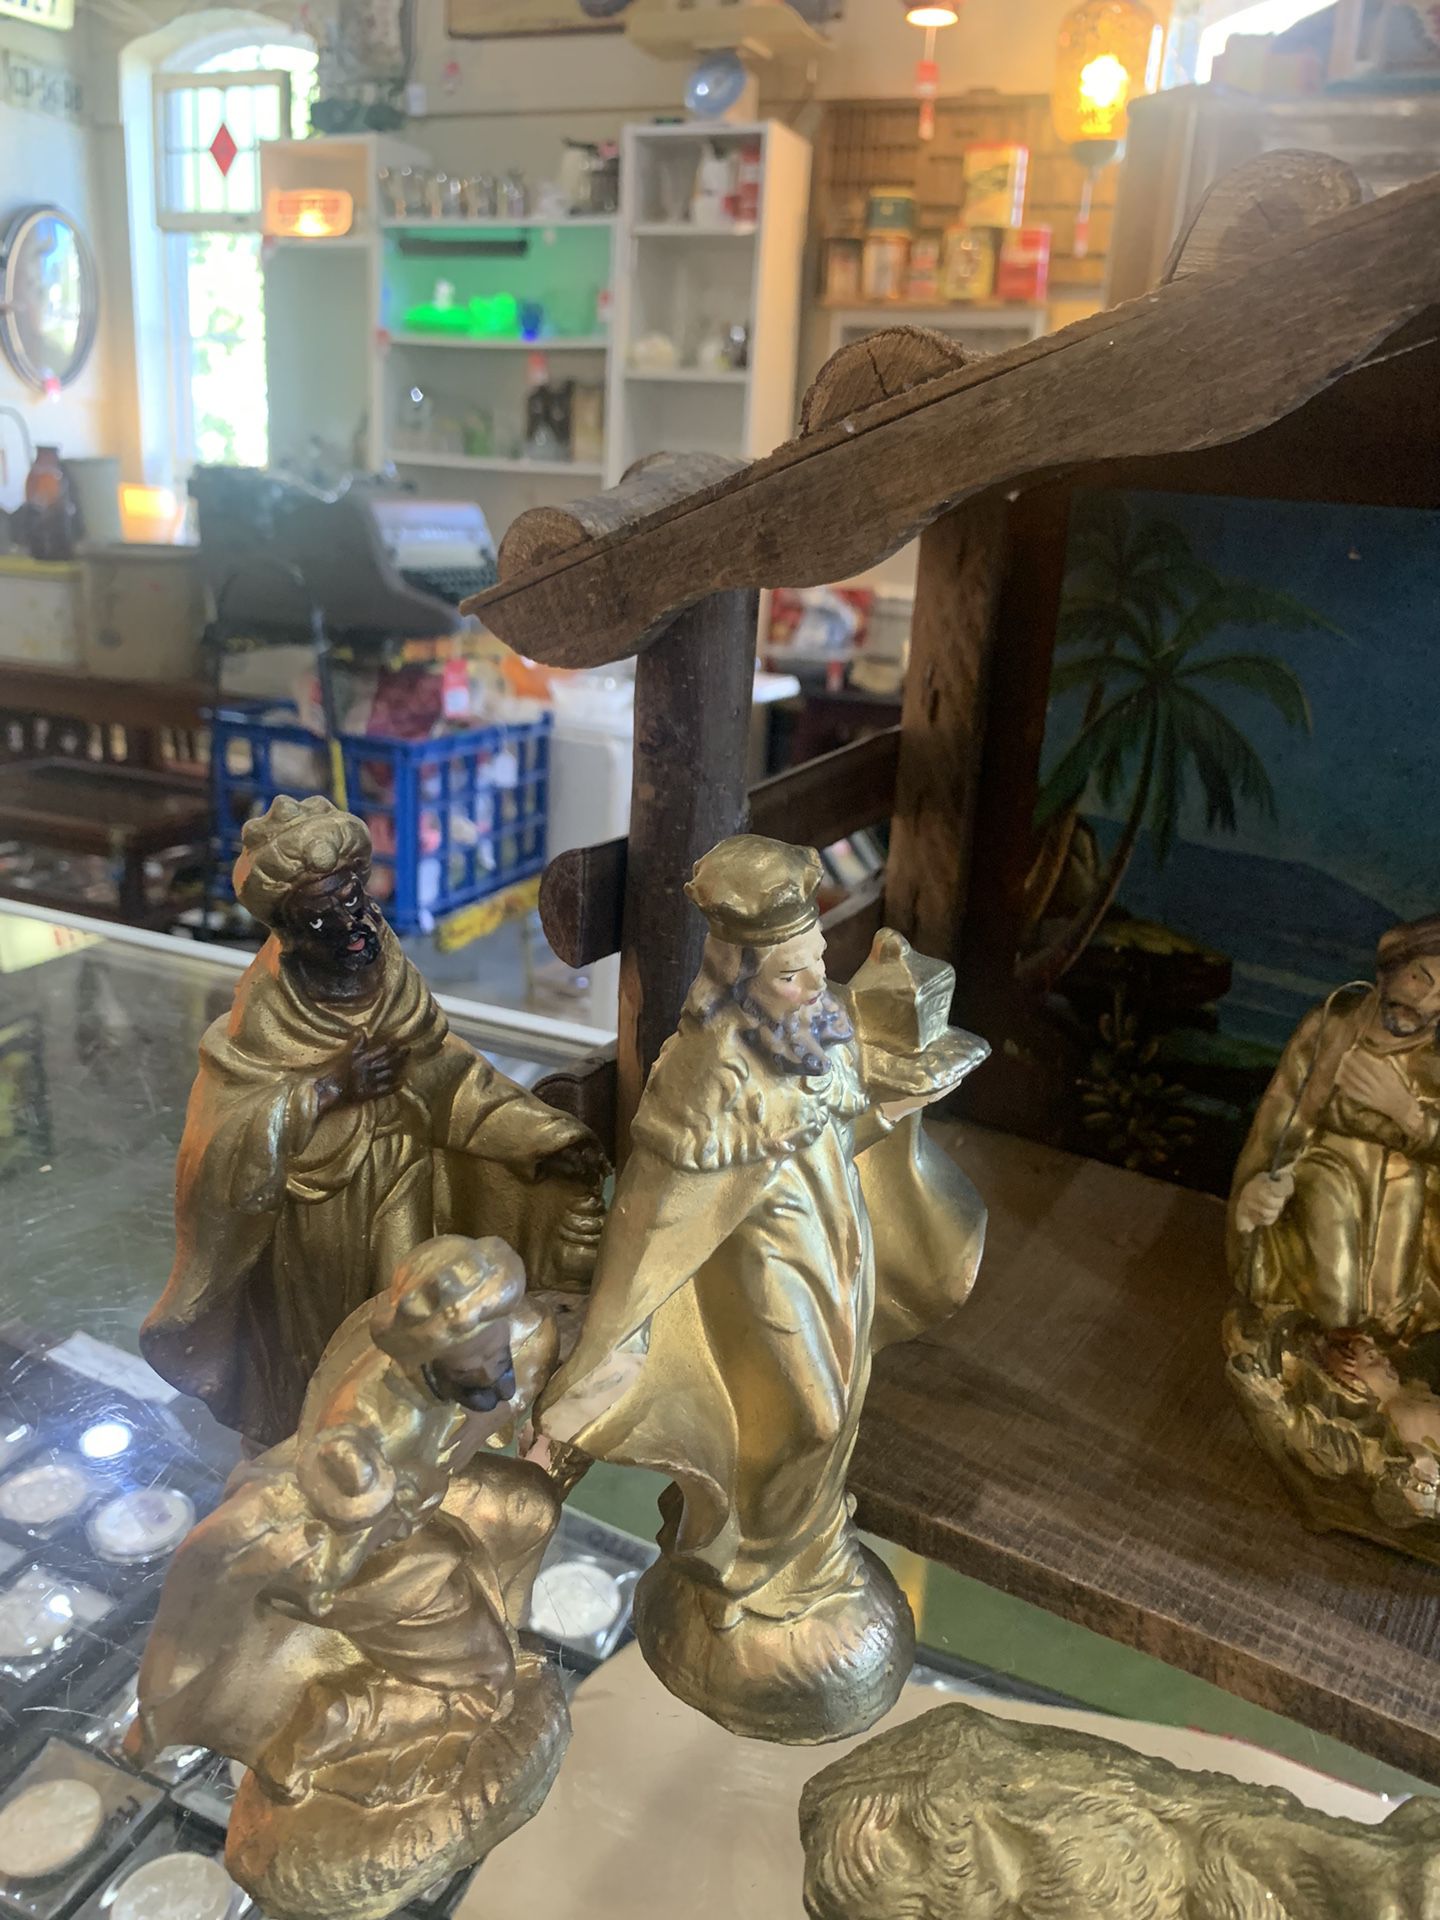 17x8x11 Nativity set manger scene MADE IN ITALY CHRISTMAS.  Johanna at Antiques and More. Located at 316b Main Street Buda. Antiques vintage retro fur